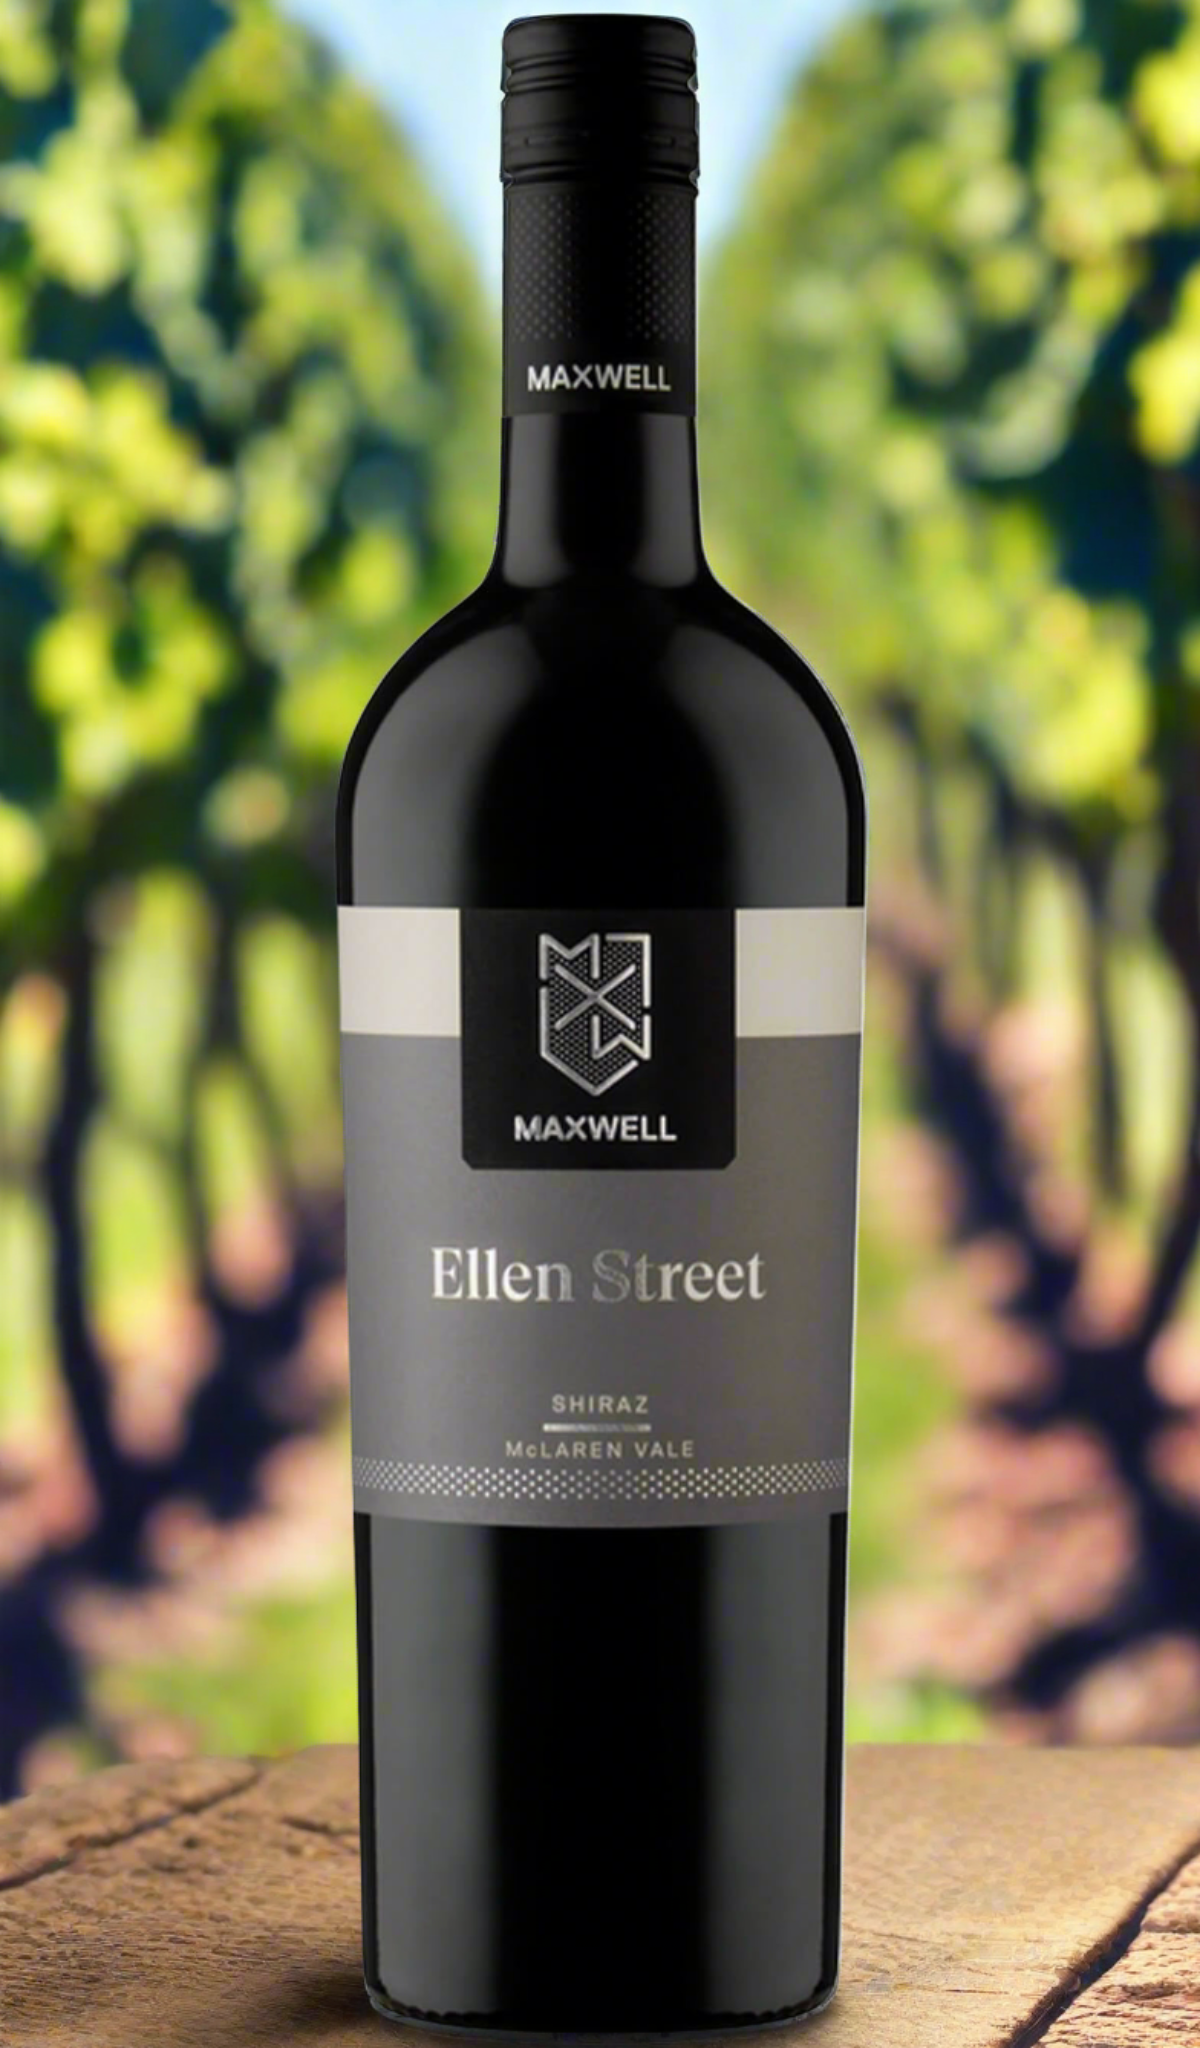 Find out more, explore the range and buy Maxwell Ellen Street Shiraz 2020 (McLaren Vale) available online at Wine Sellers Direct - Australia's independent liquor specialists.